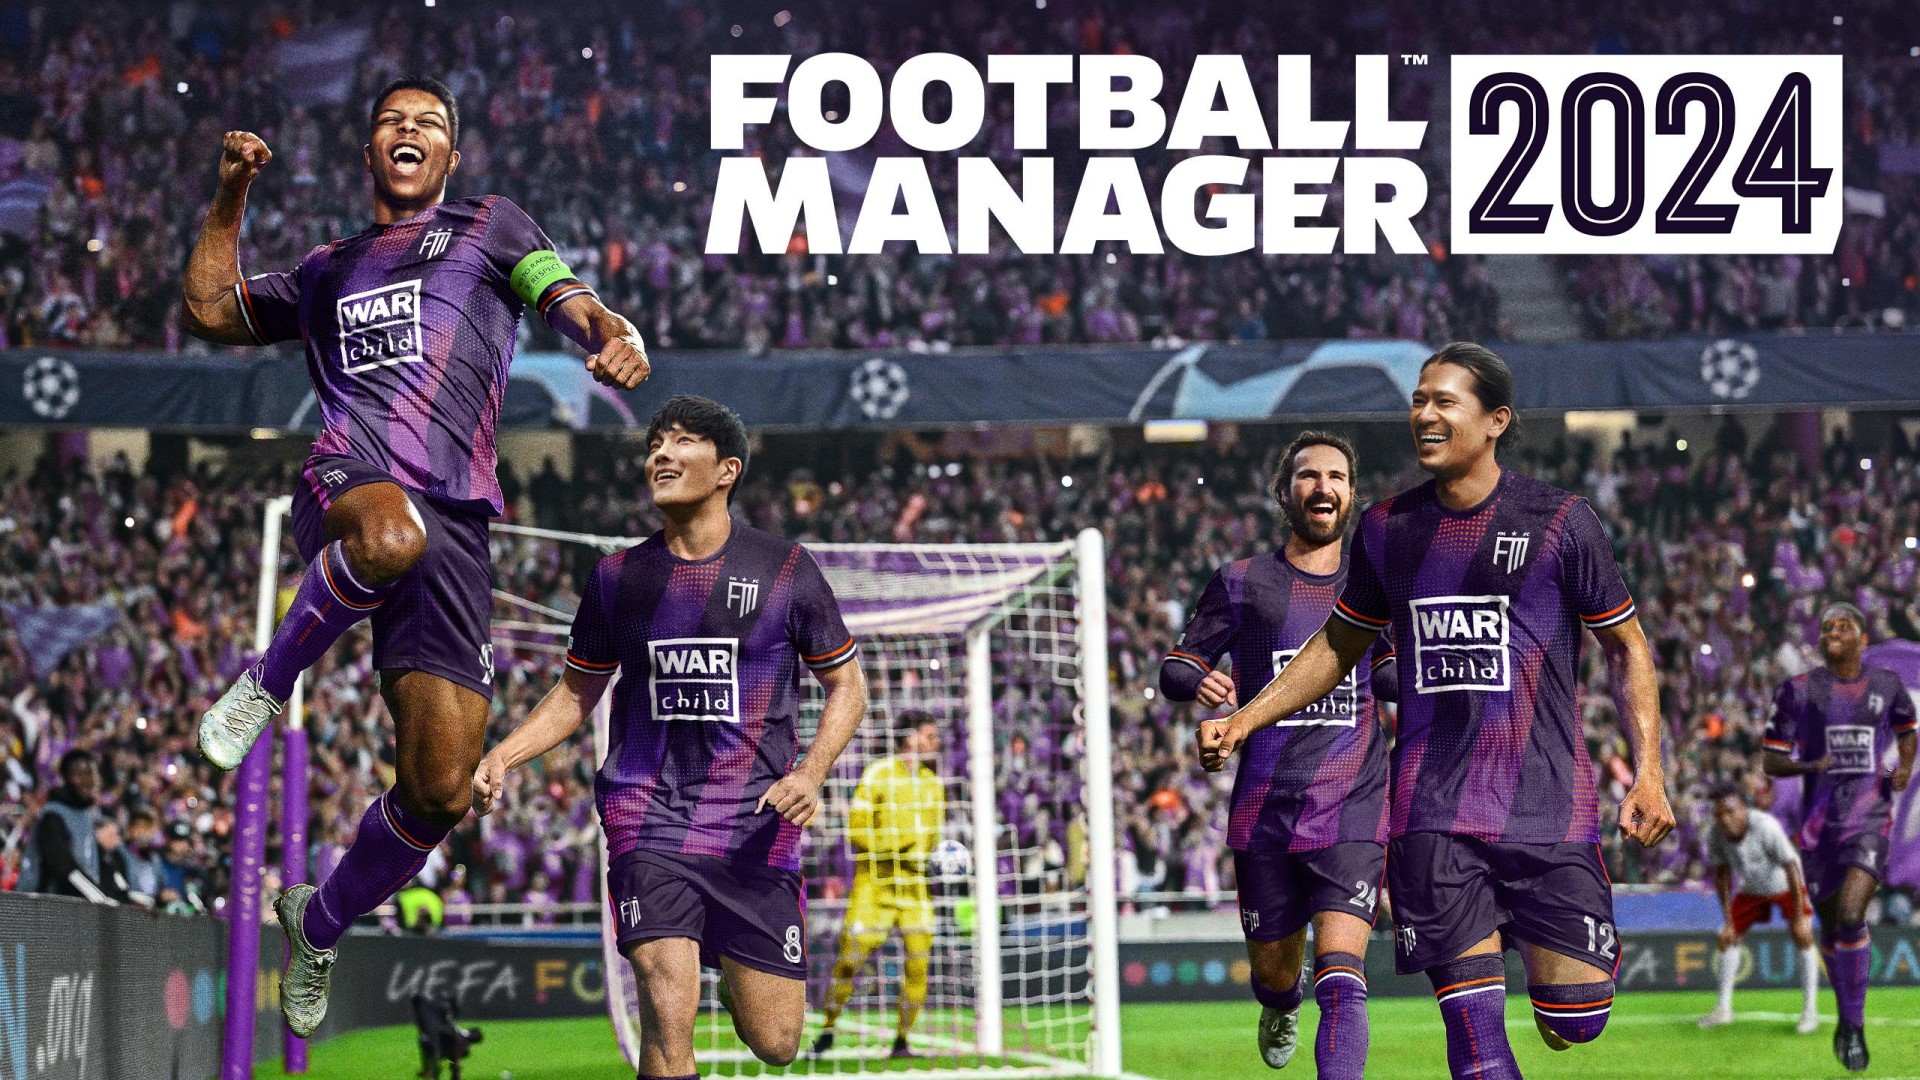 Football Manager 2024 Crosses 6 Million Players